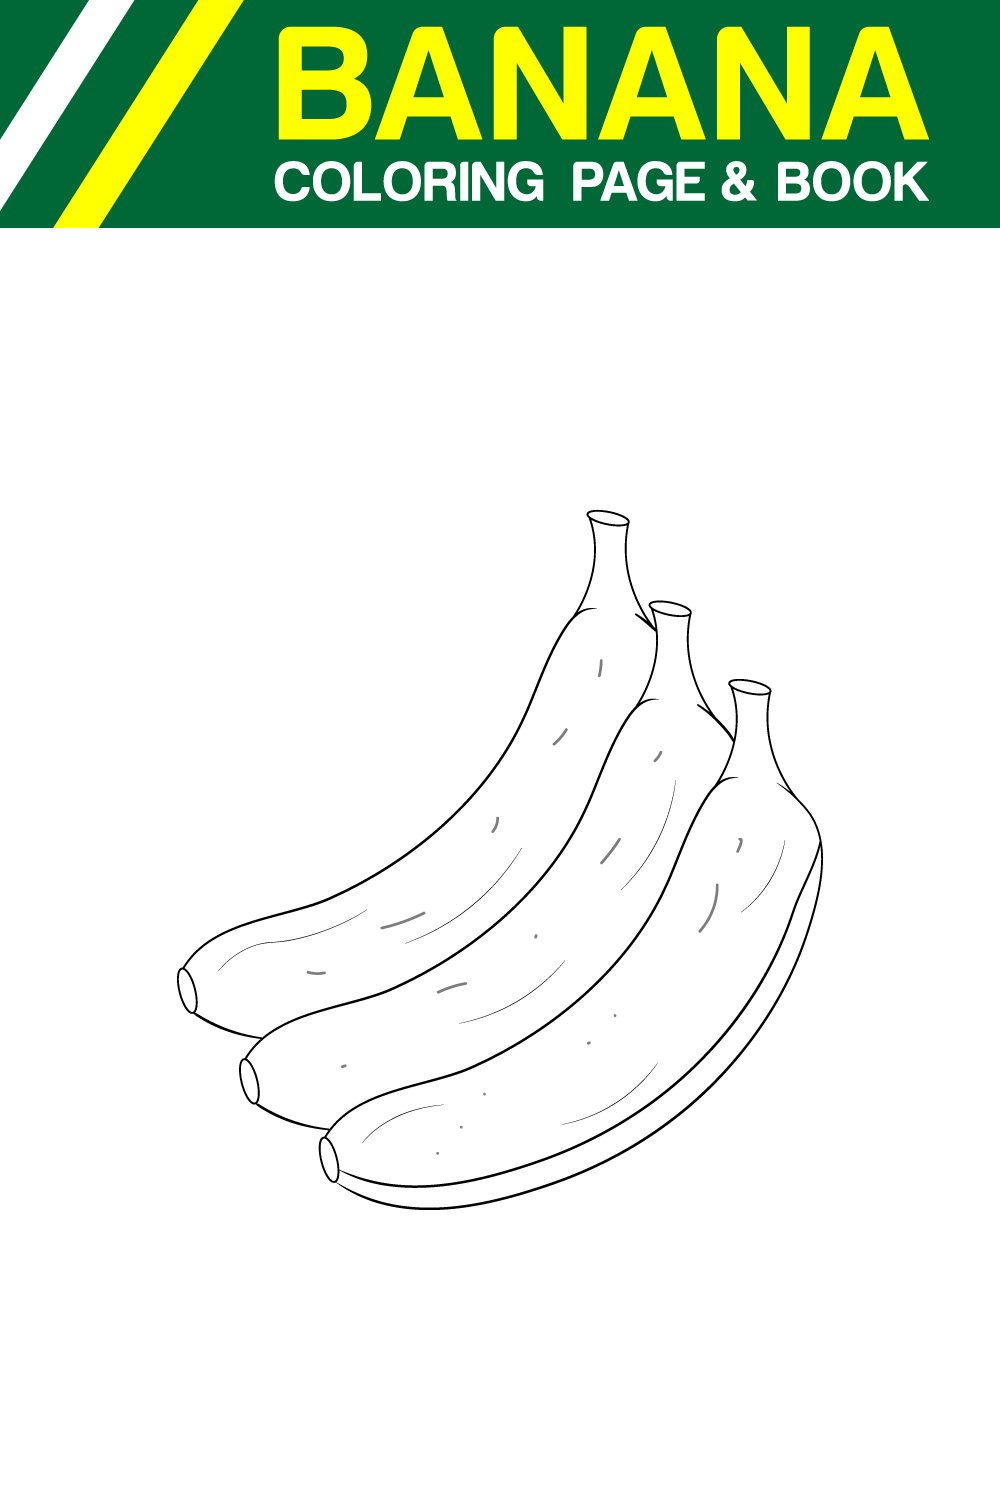 Banana Fruits Coloring Page For Adults pinterest preview image.